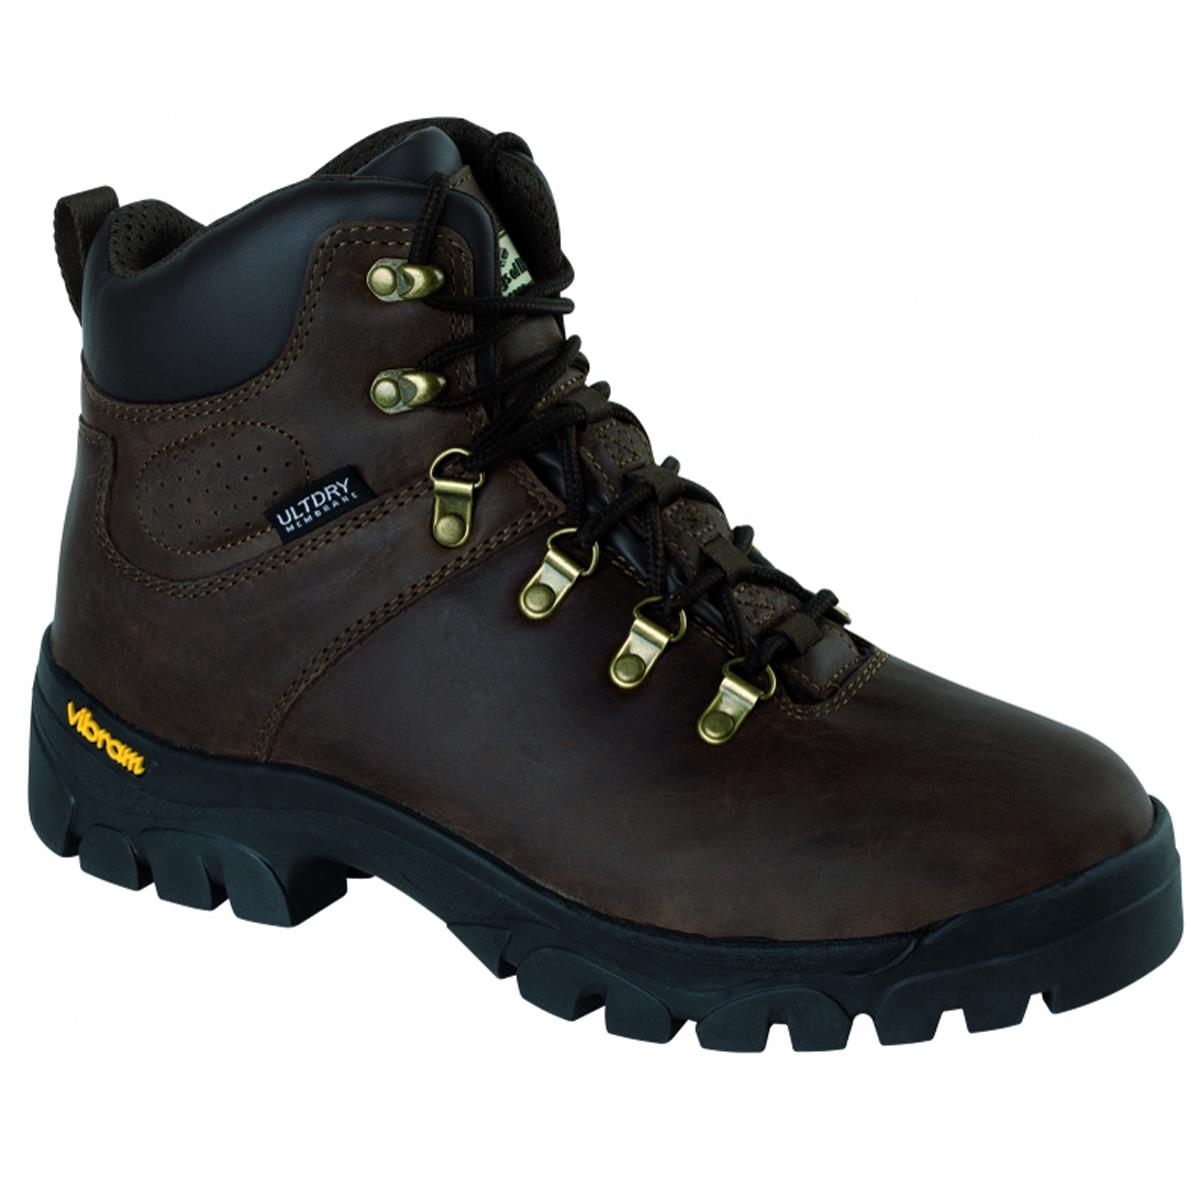 What's the width fitting for a size 4 in Hoggs Of Fife Munro Hiking Boots?